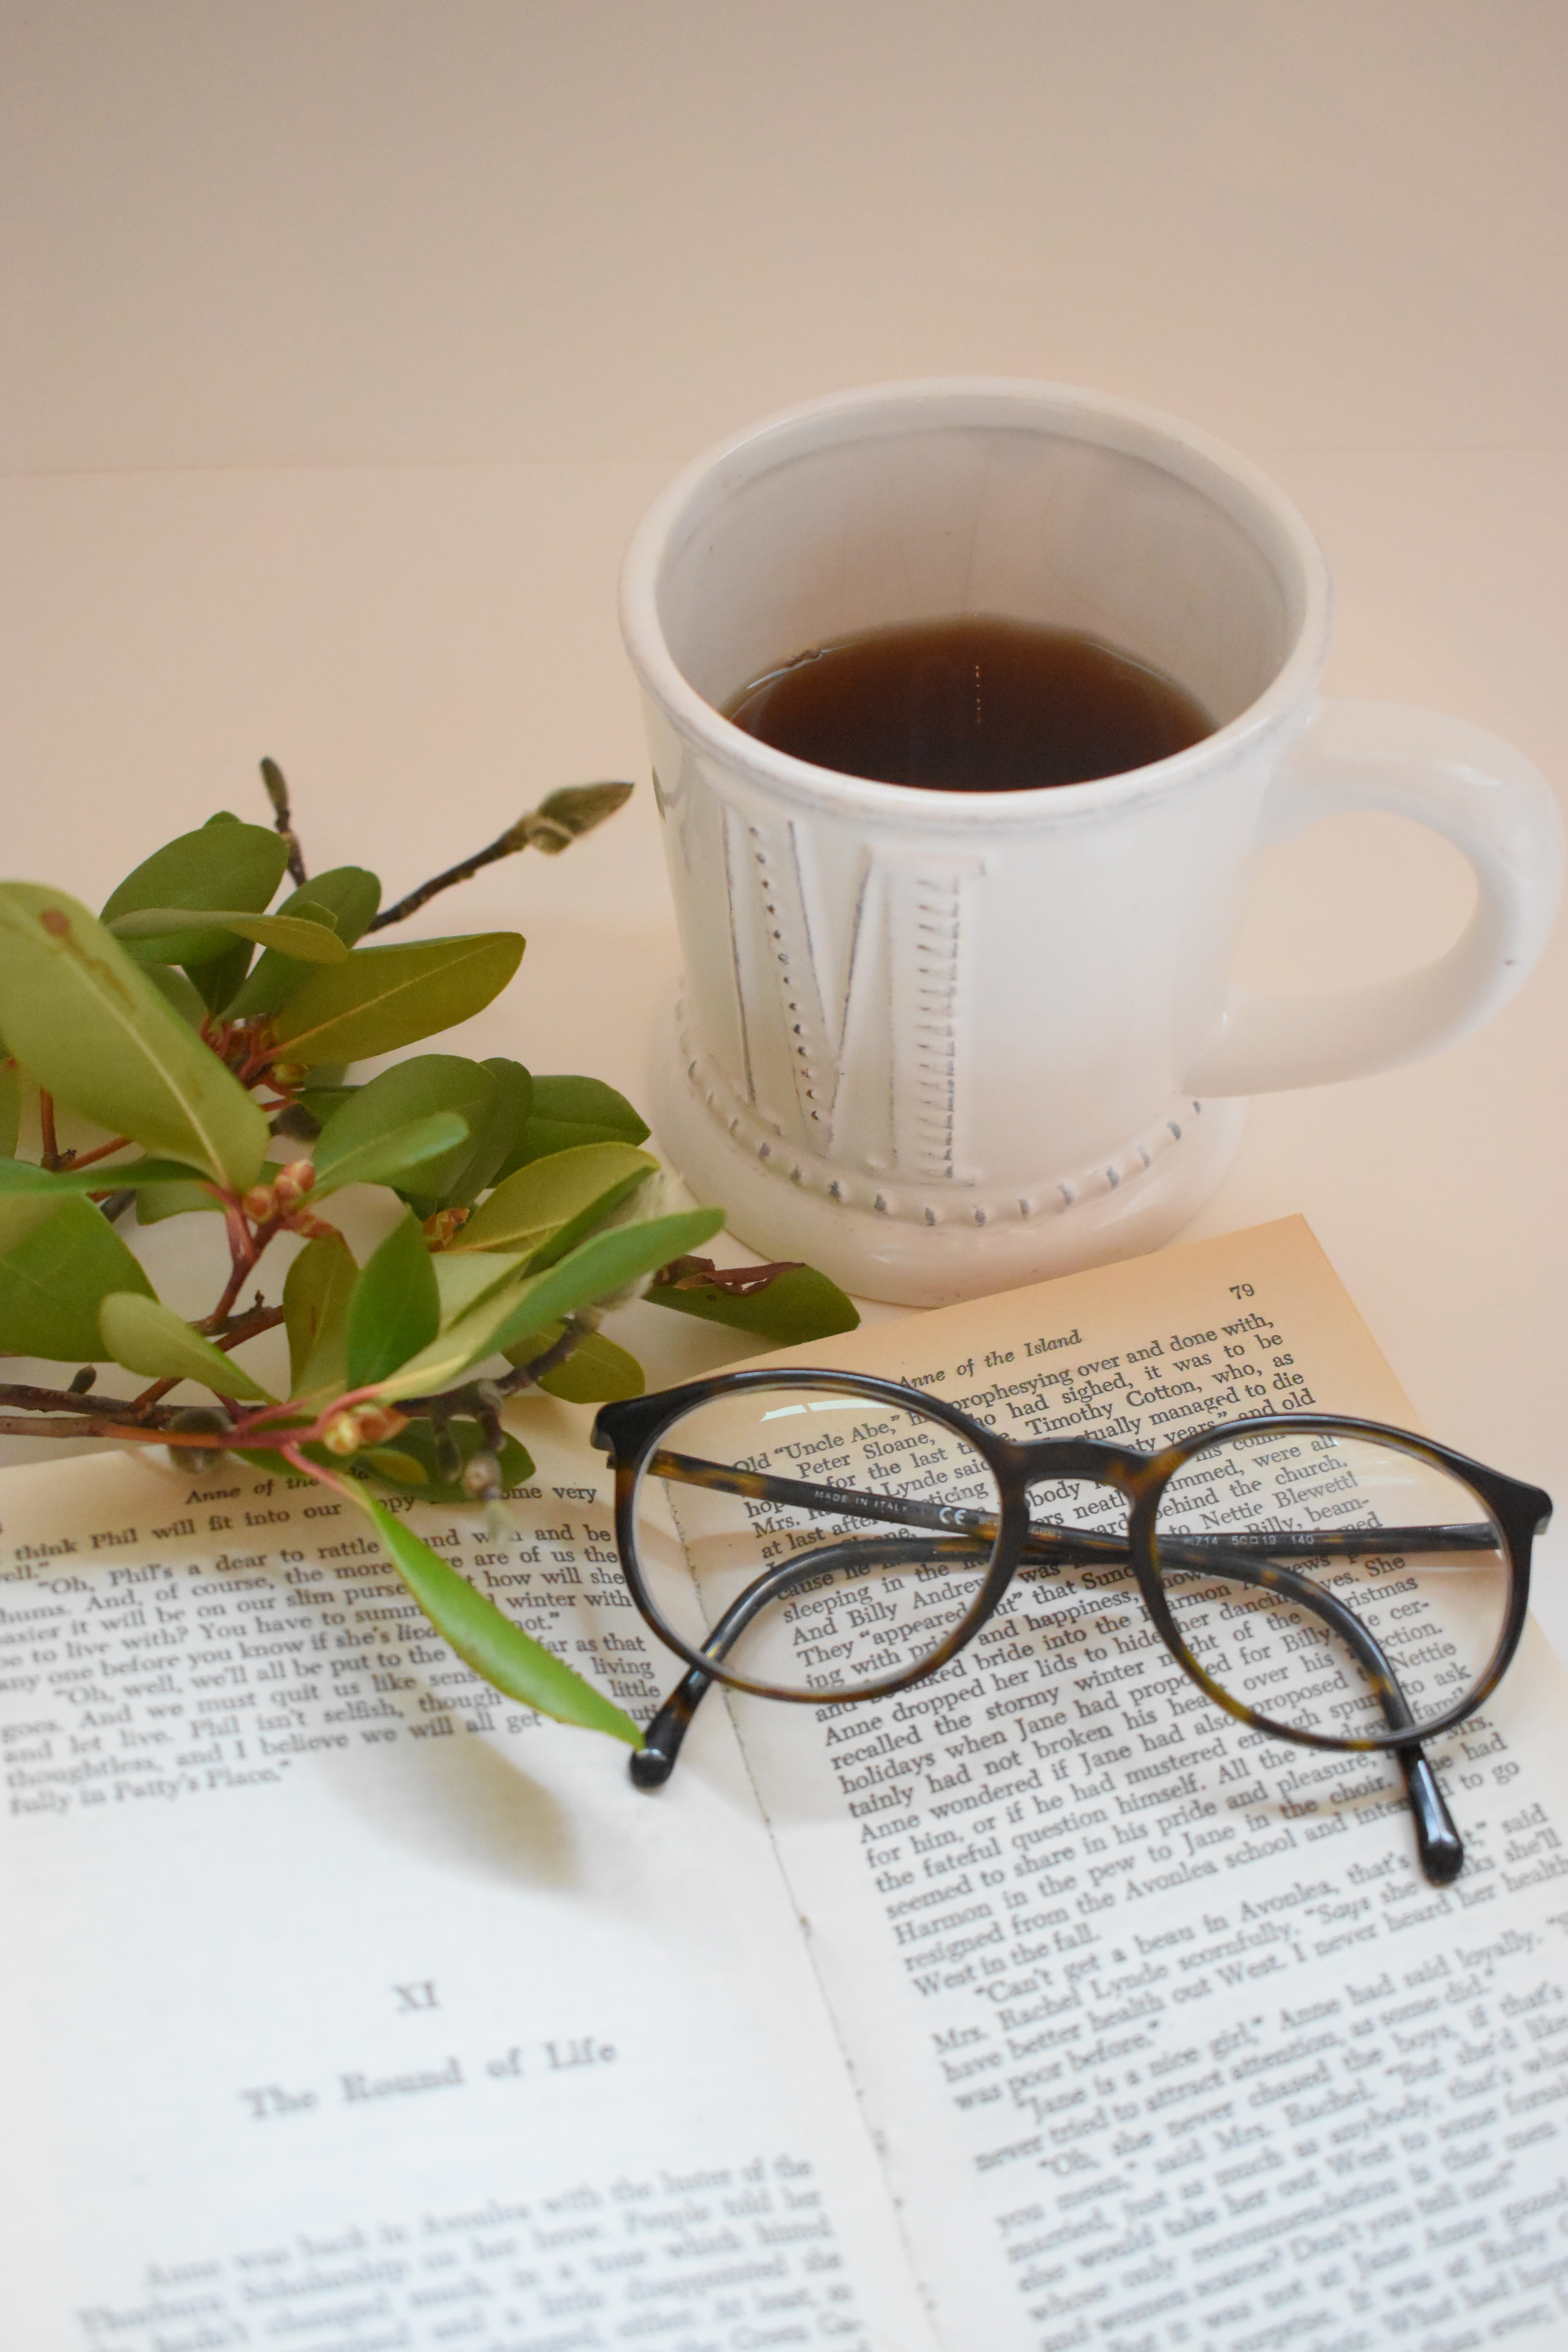 spectacles, miscellanea, miscellaneous, cup, book, glasses